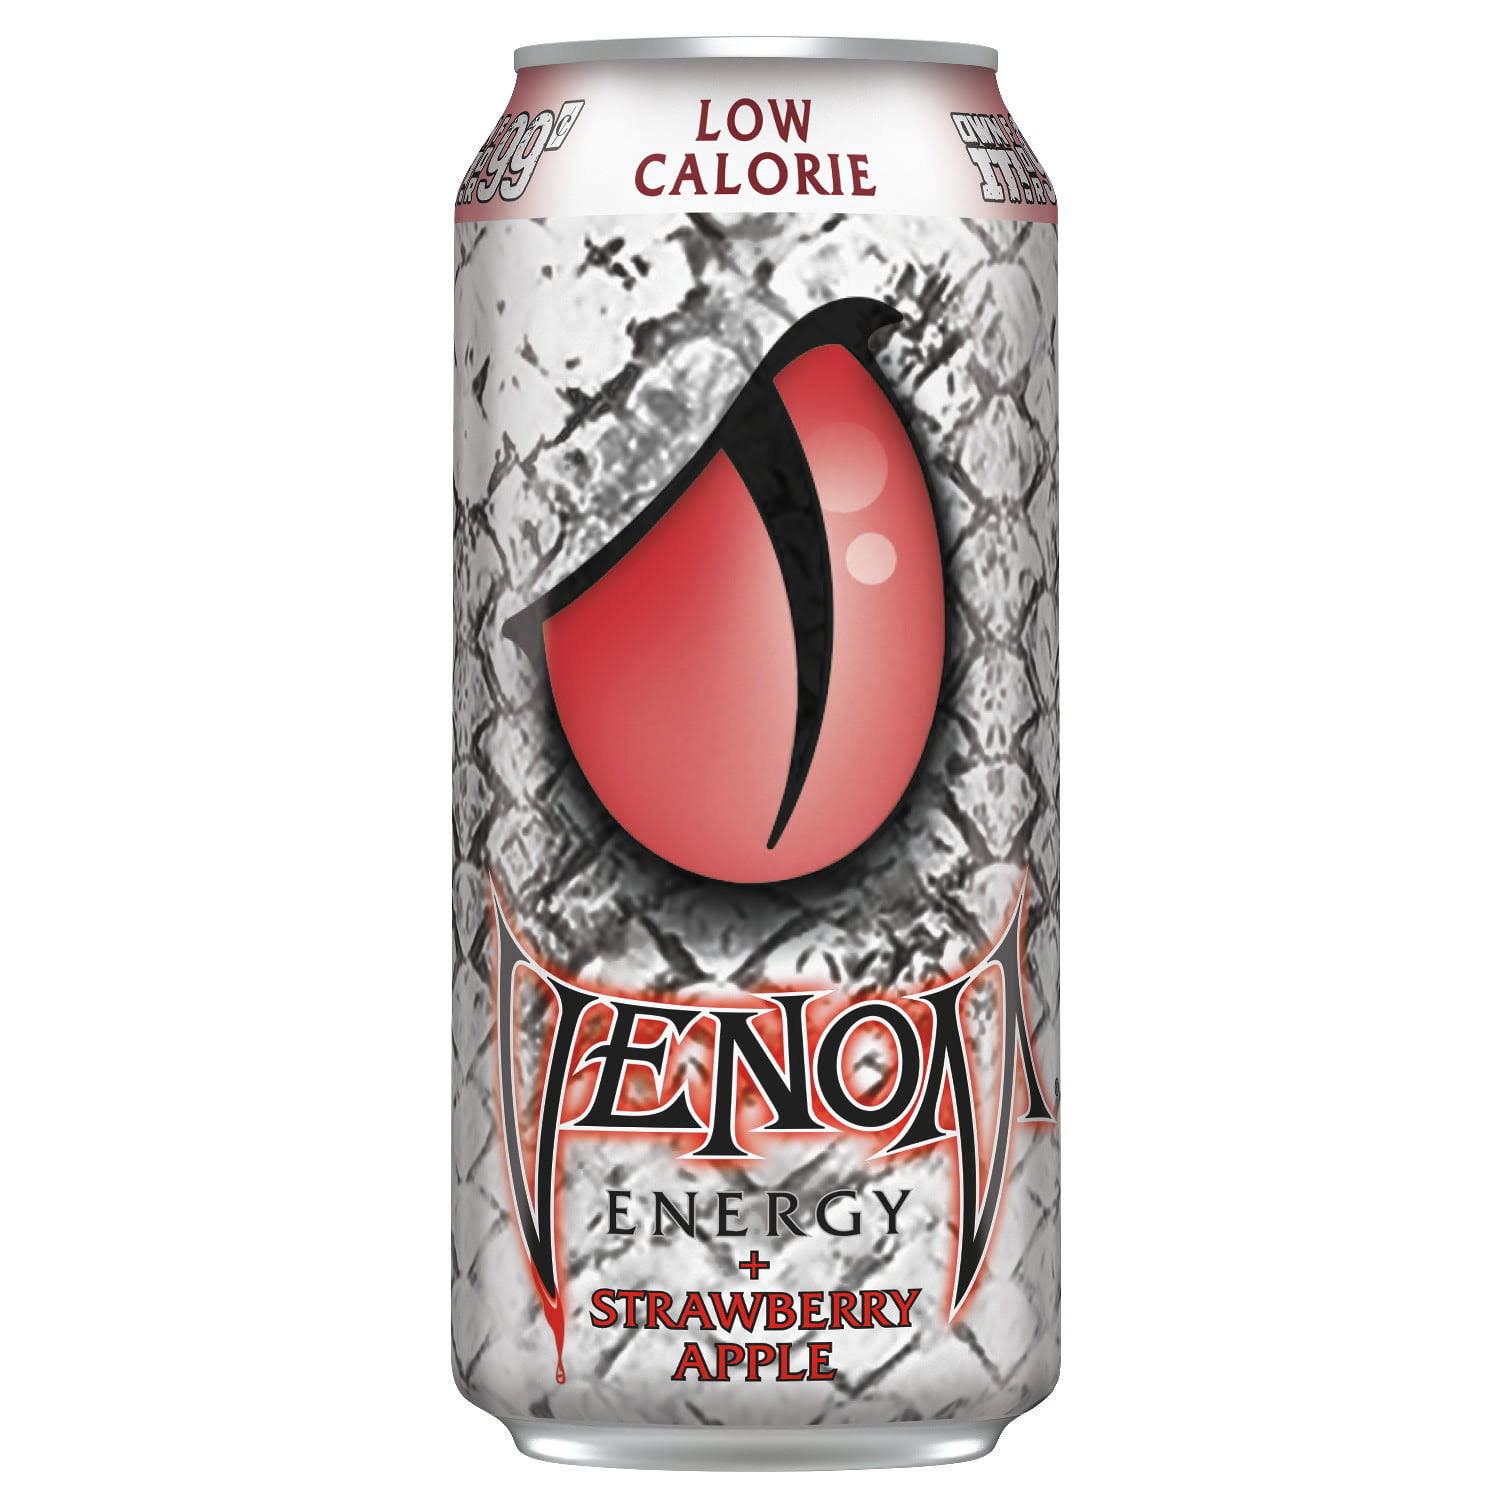 Venom Energy Low Calorie Strawberry Apple Drink, 16 Ounce (16 Cans)